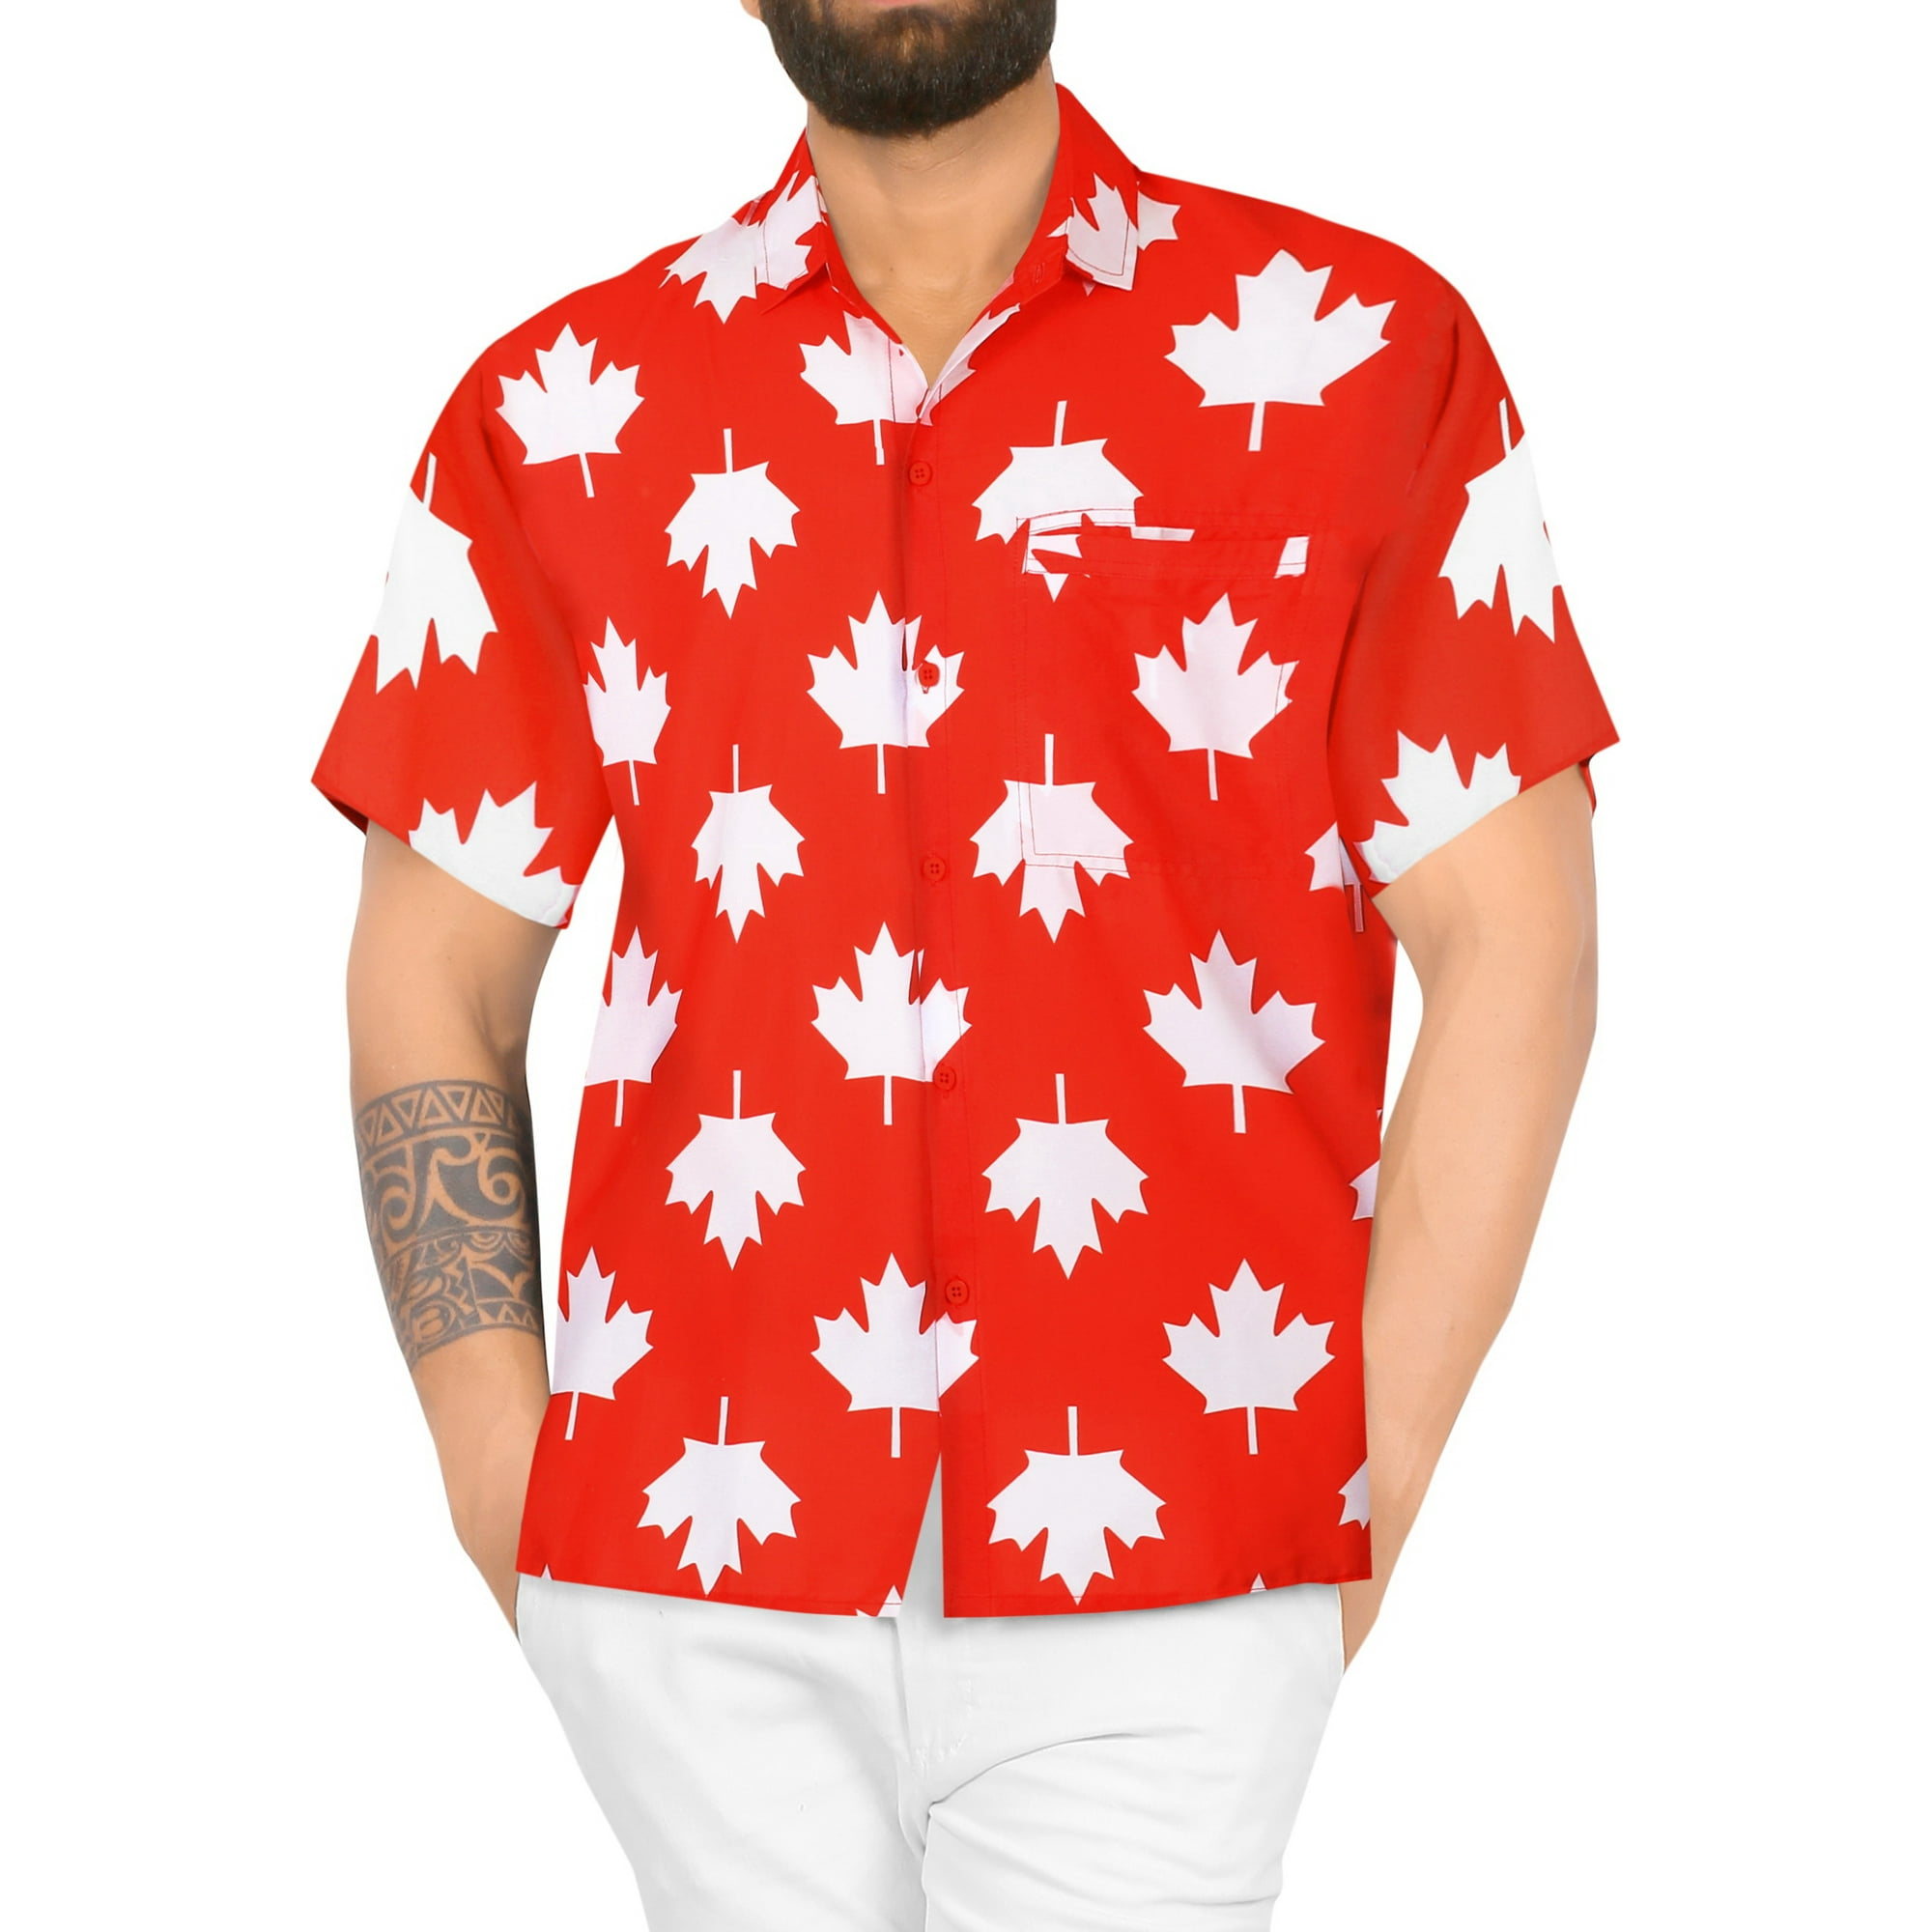 Canada Maple Leaf Print T Shirt Tees For Men Casual Short Sleeve